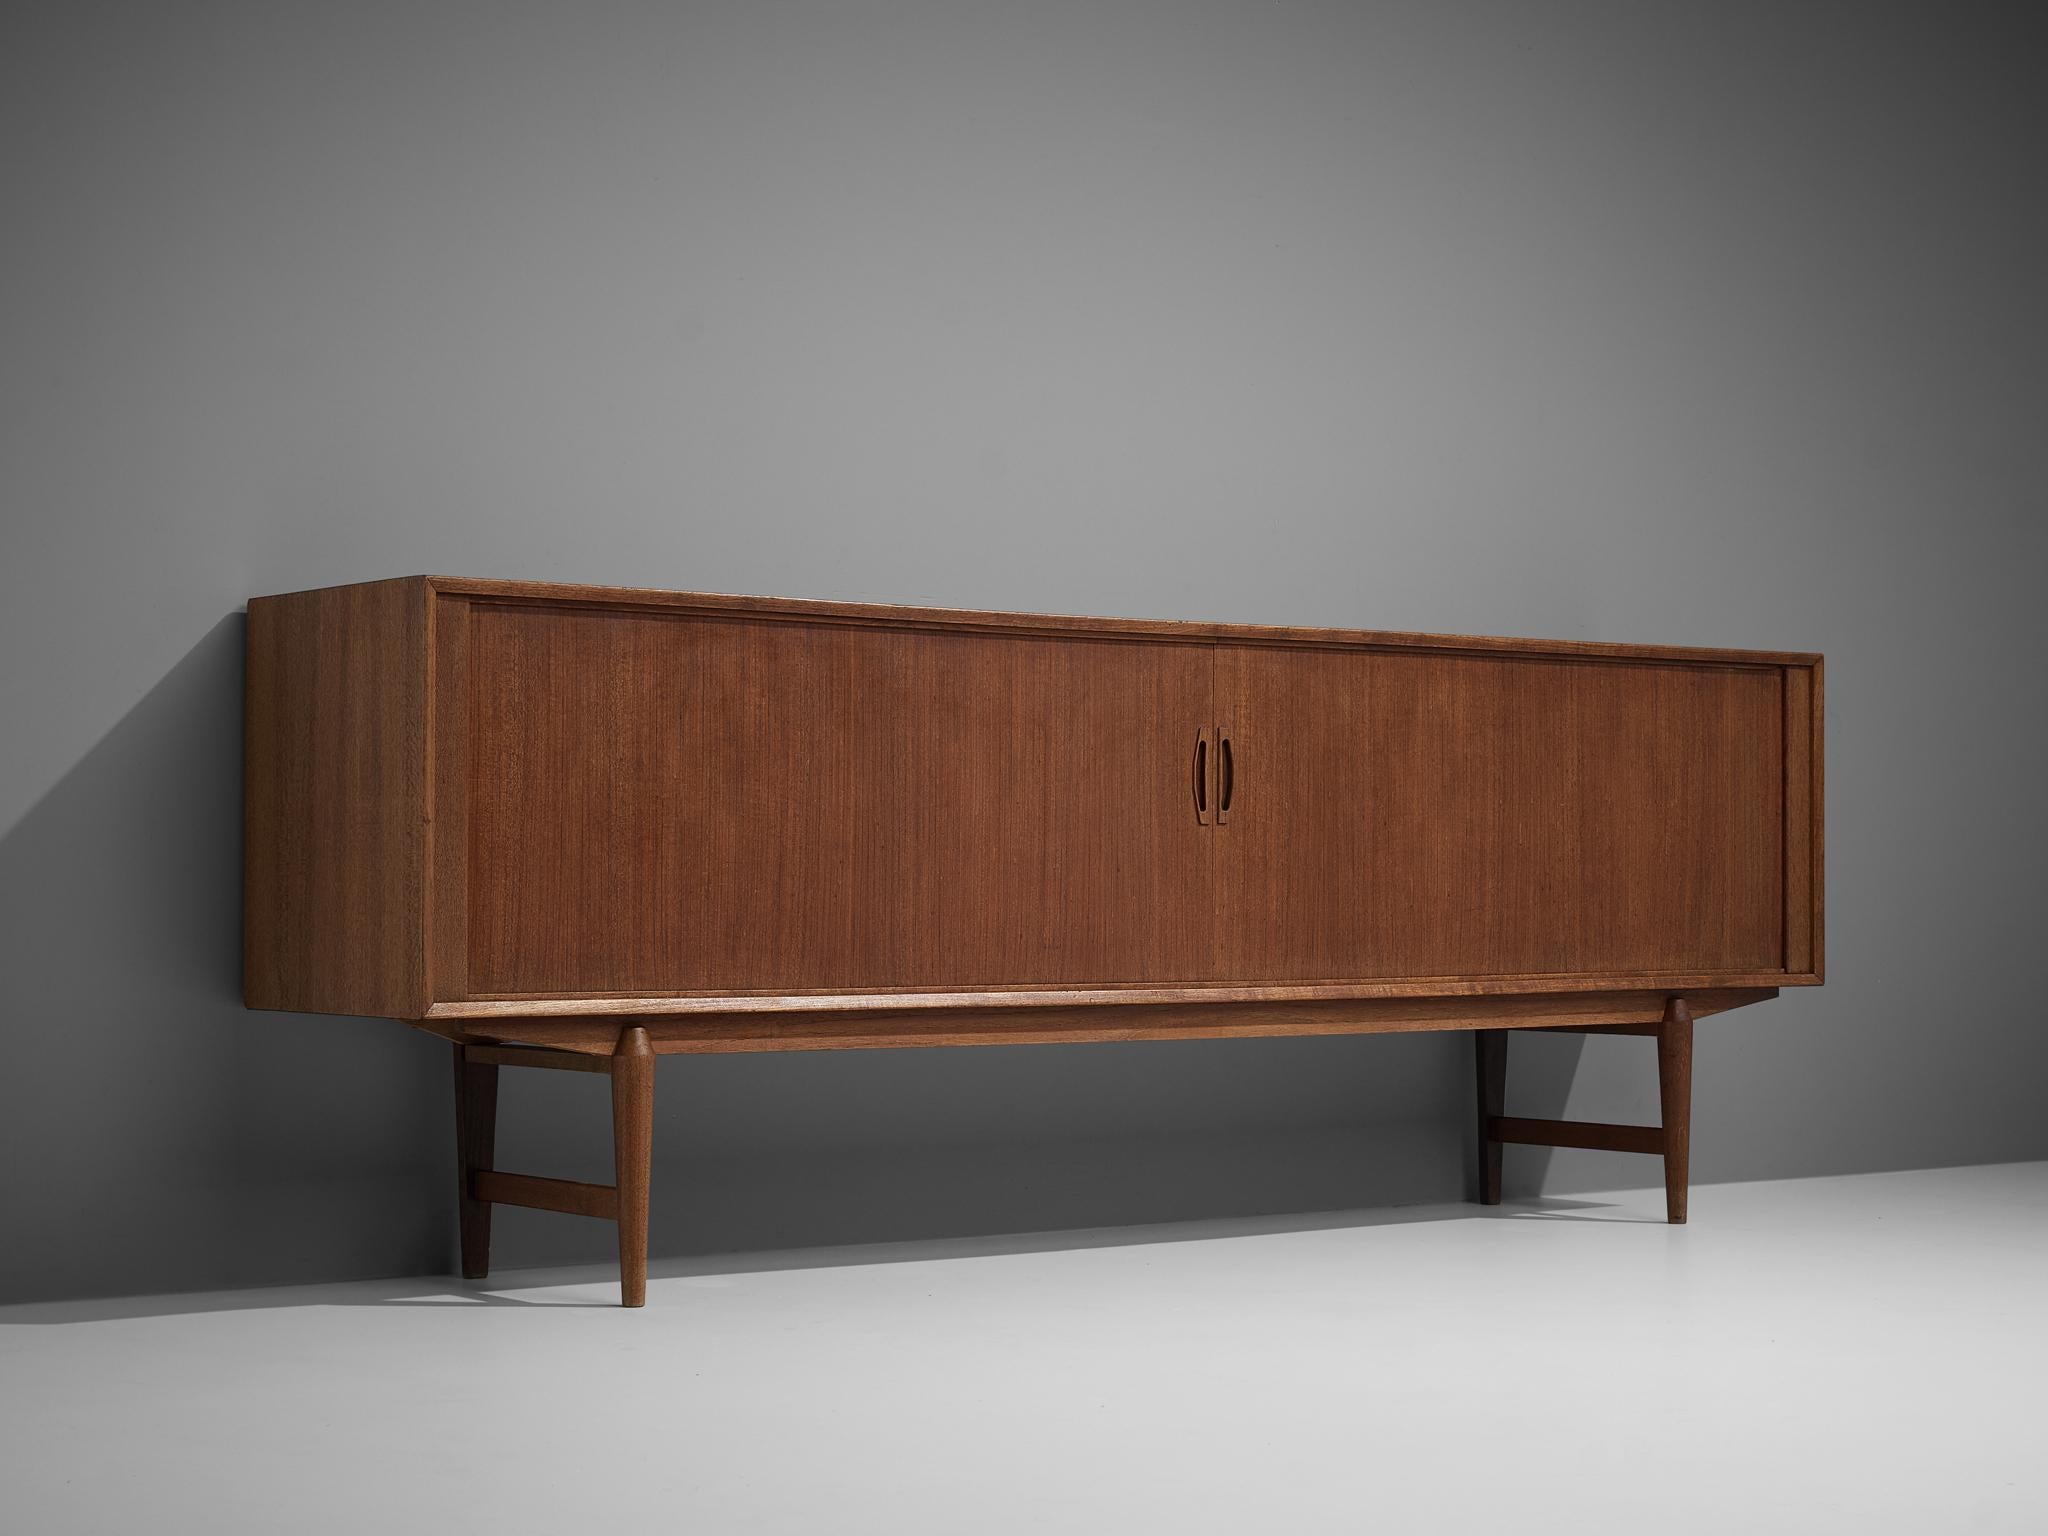 Sideboard, teak, Denmark, 1960s

Danish sideboard executed in teak. The sideboard features two sliding doors that will move inwards when opening the doors. The doors are 'framed' by a clean cut teak frame. The curved handles in the middle of the